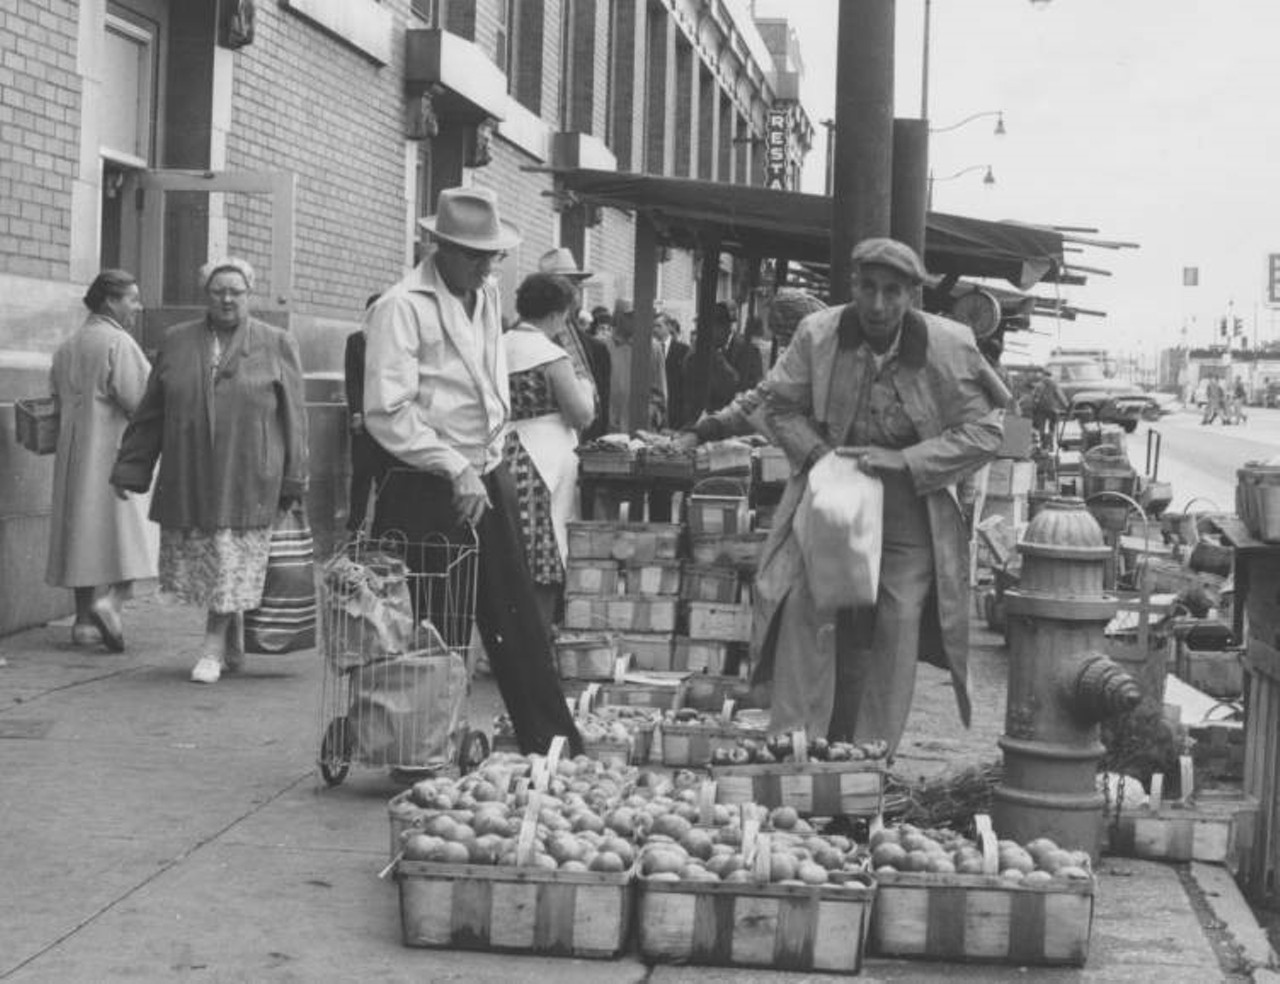 View of shoppers and outdoor produce stall along sidewalk on Lorain Avenue. The photo was taken September 30, 1962 in connection with the fiftieth anniversary of the market.